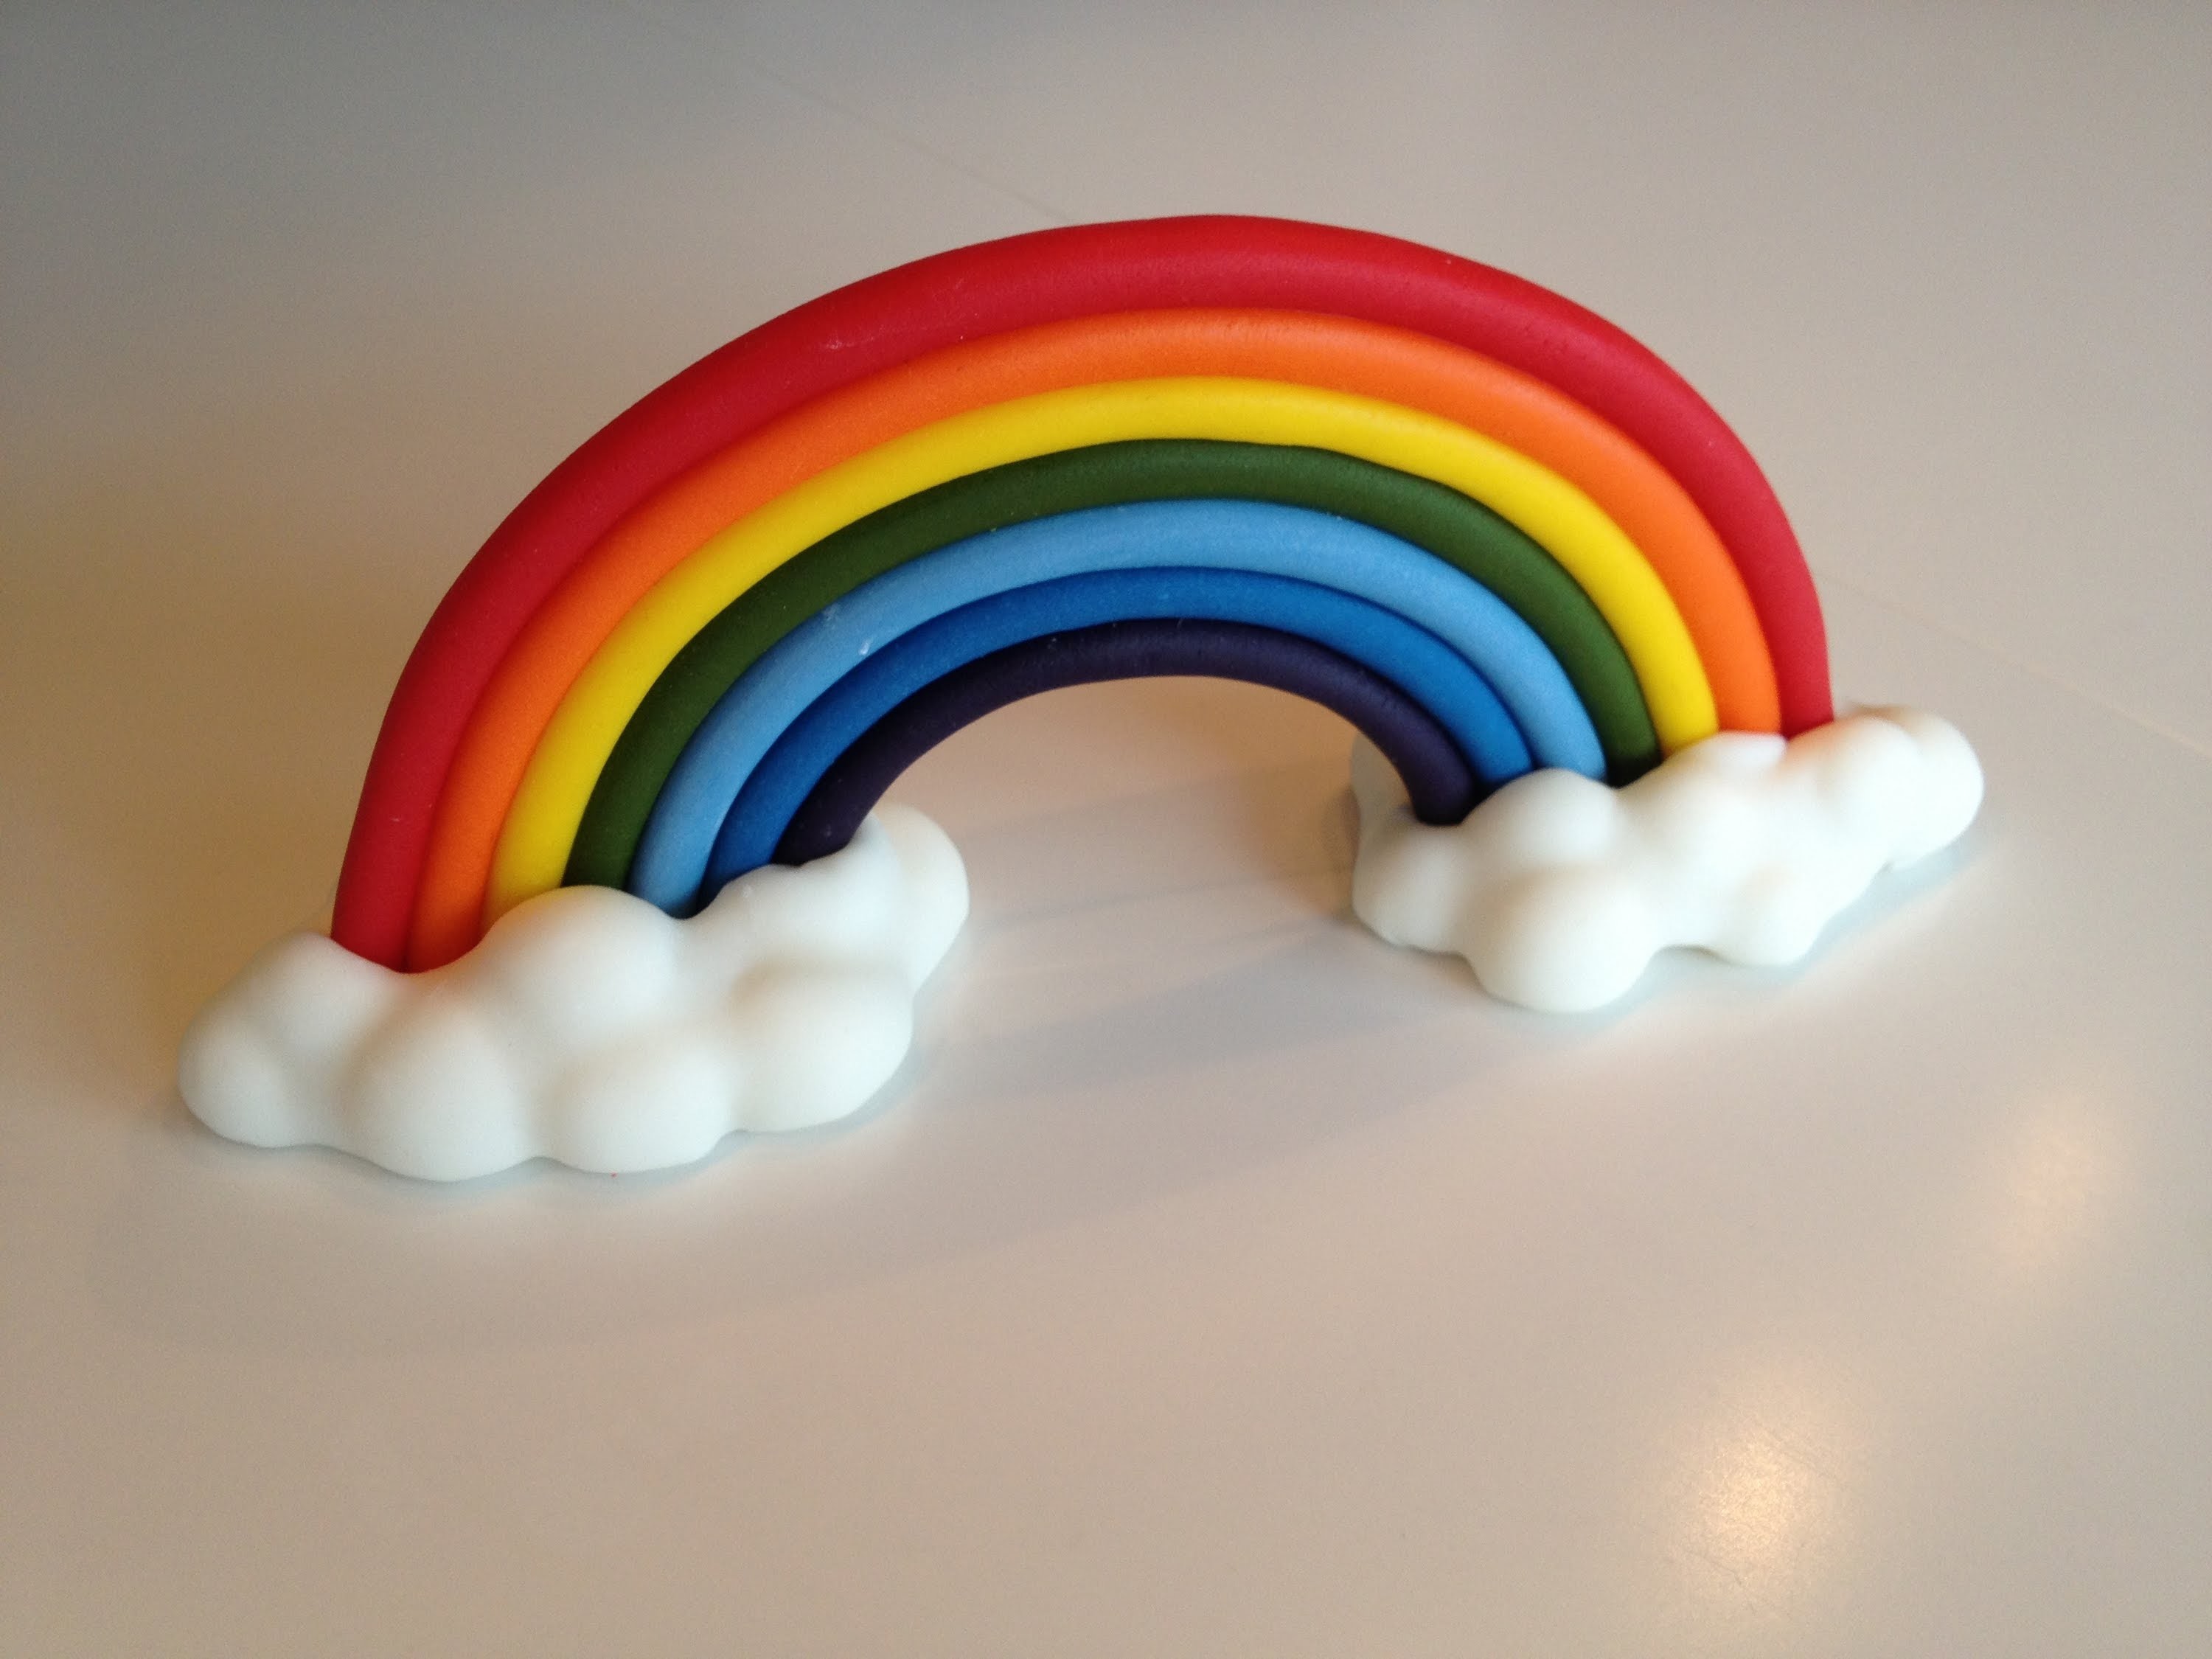 How to make a fondant rainbow with clouds